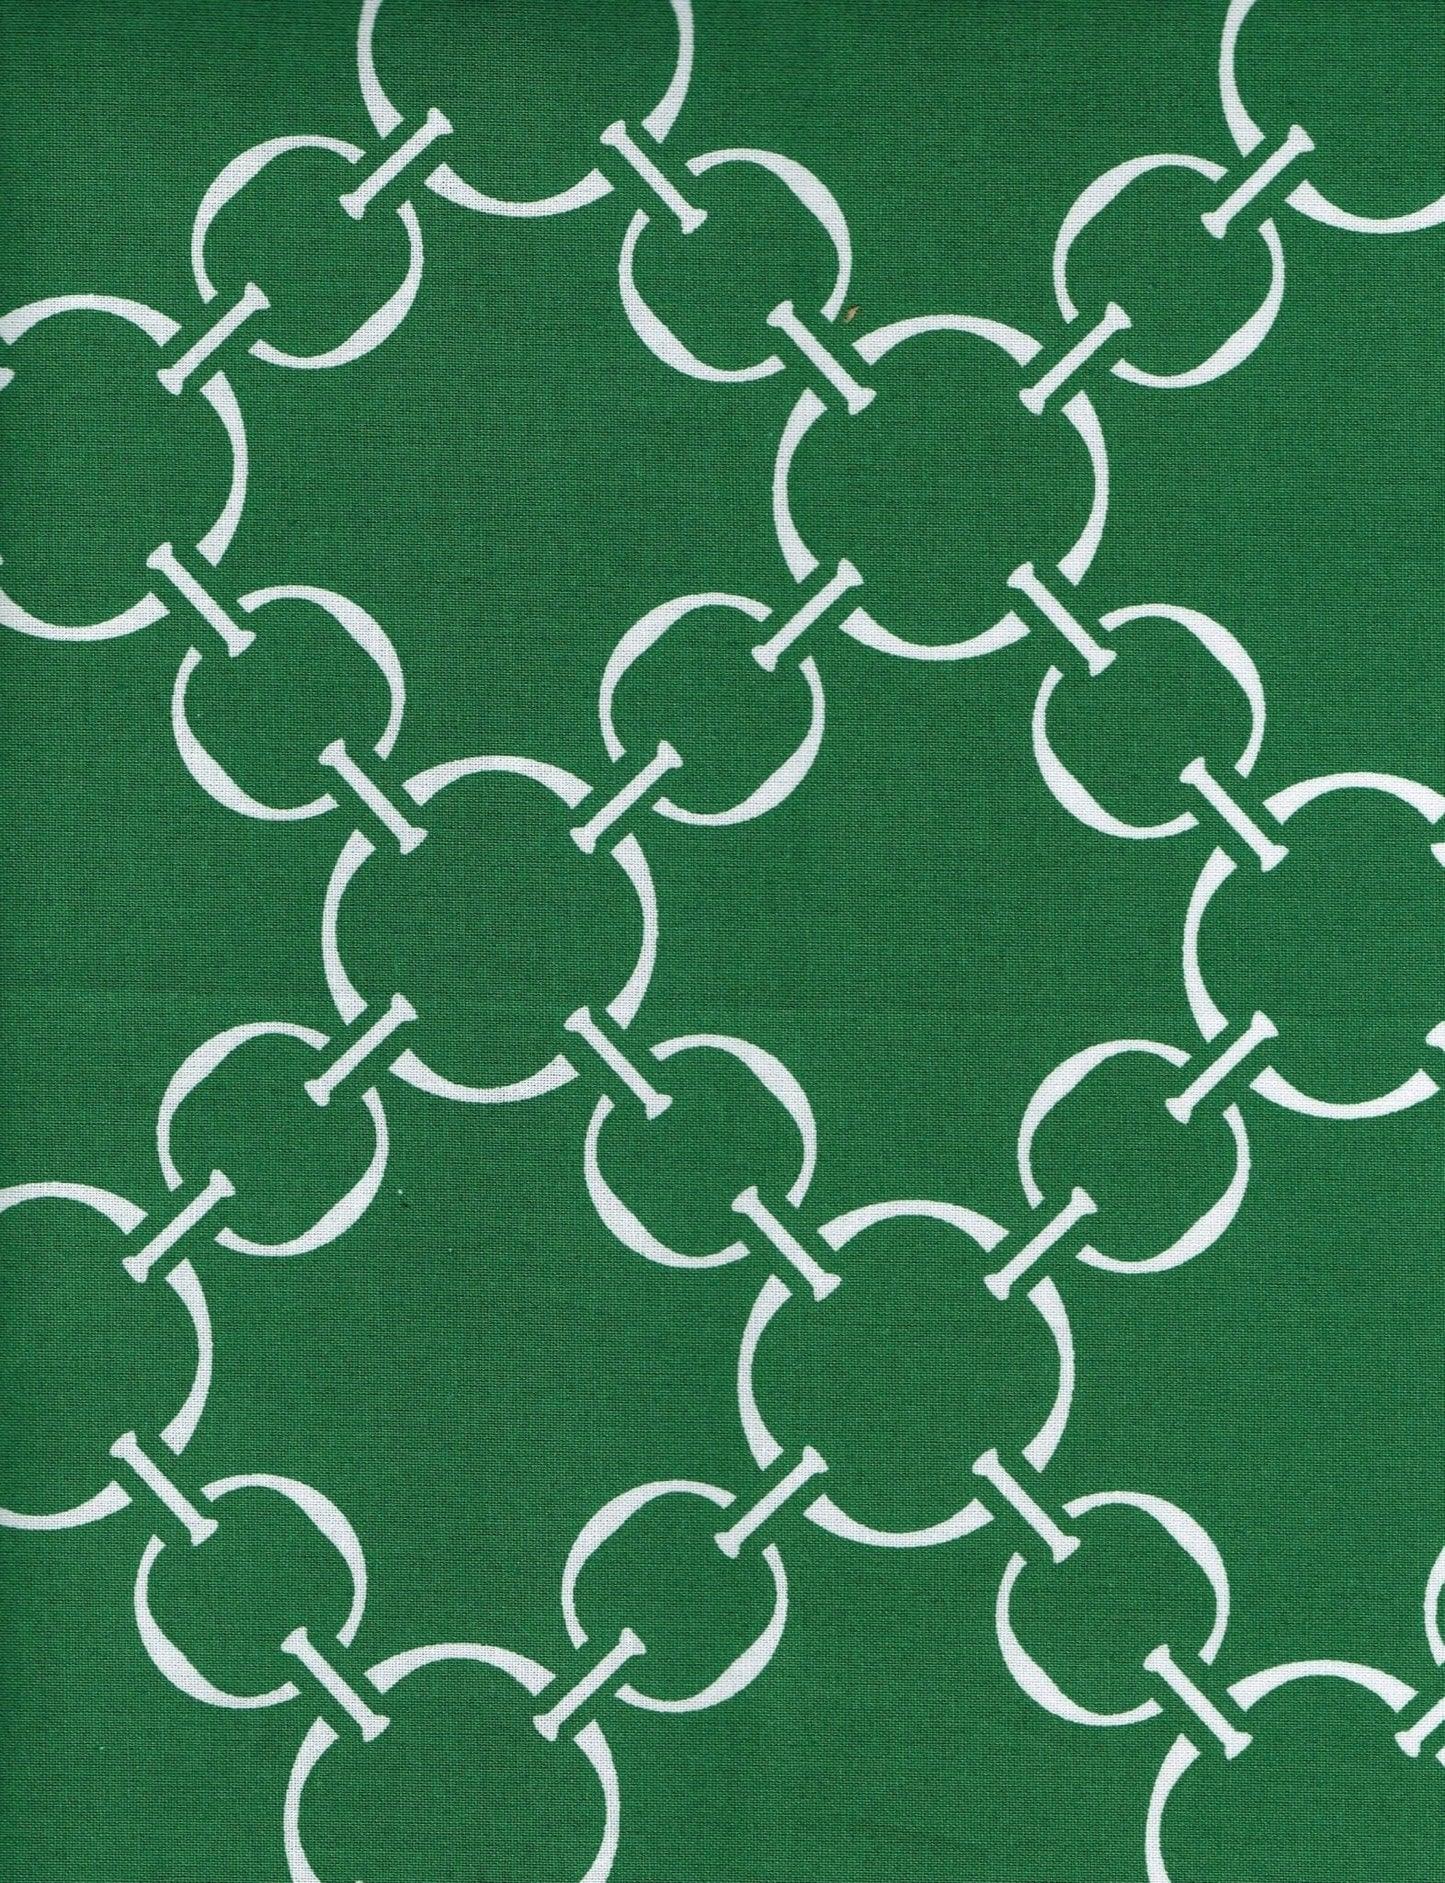 Hen House Linens linked-up ivy green reversible bold striped chocolate brown printed round quilted cloth placemats